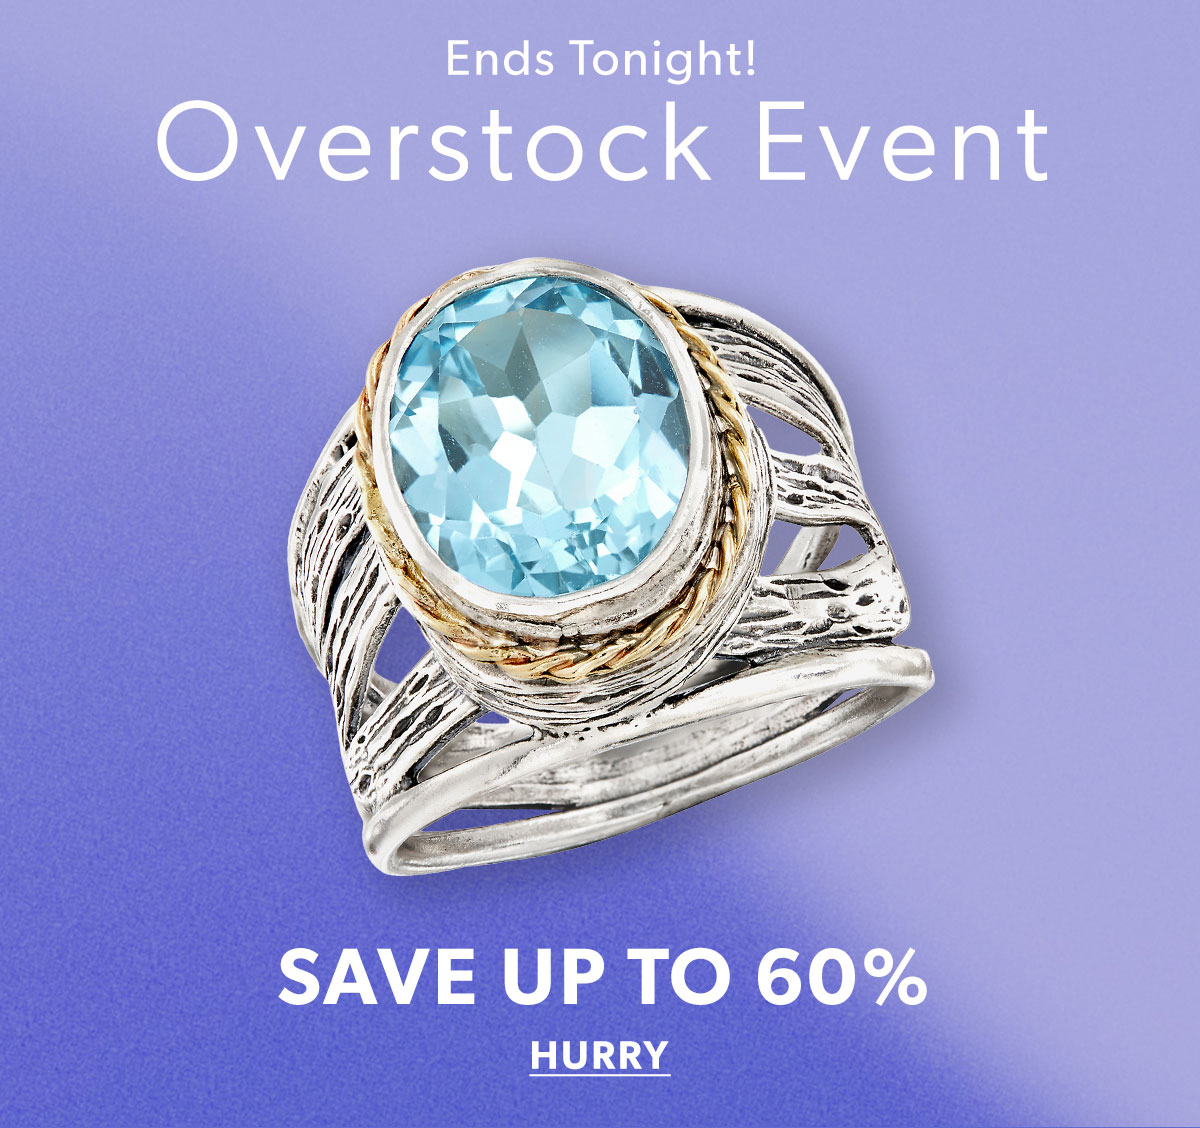 Overstock Event. Save Up To 60%. Shop Now